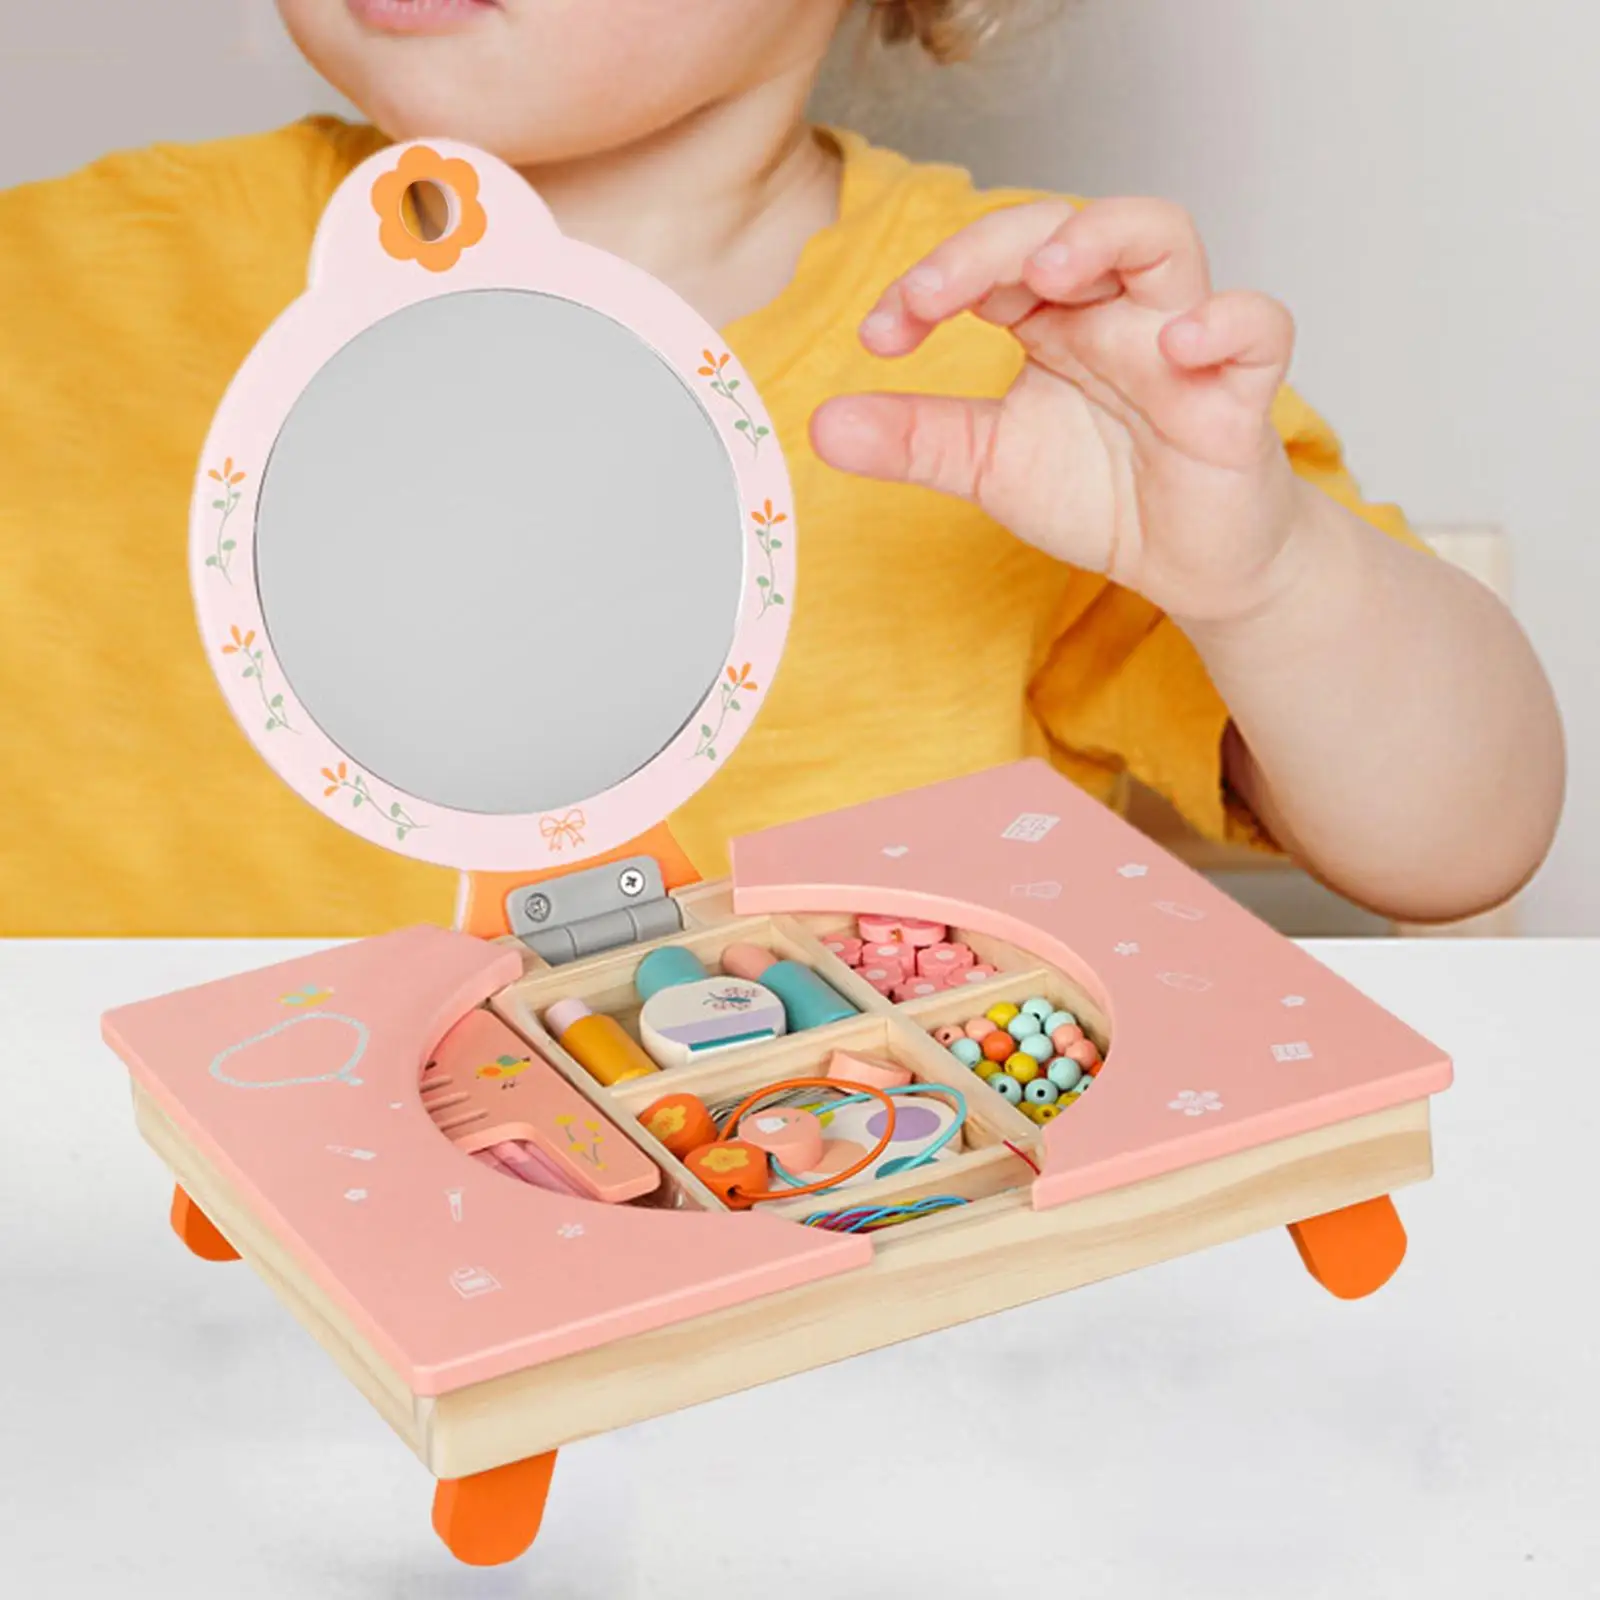 Tabletop Dresser Makeup Toy Portable Playset Learning Toys Makeup Vanity Toys Kids Makeup Vanity Toy for Toddlers Birthday Gifts